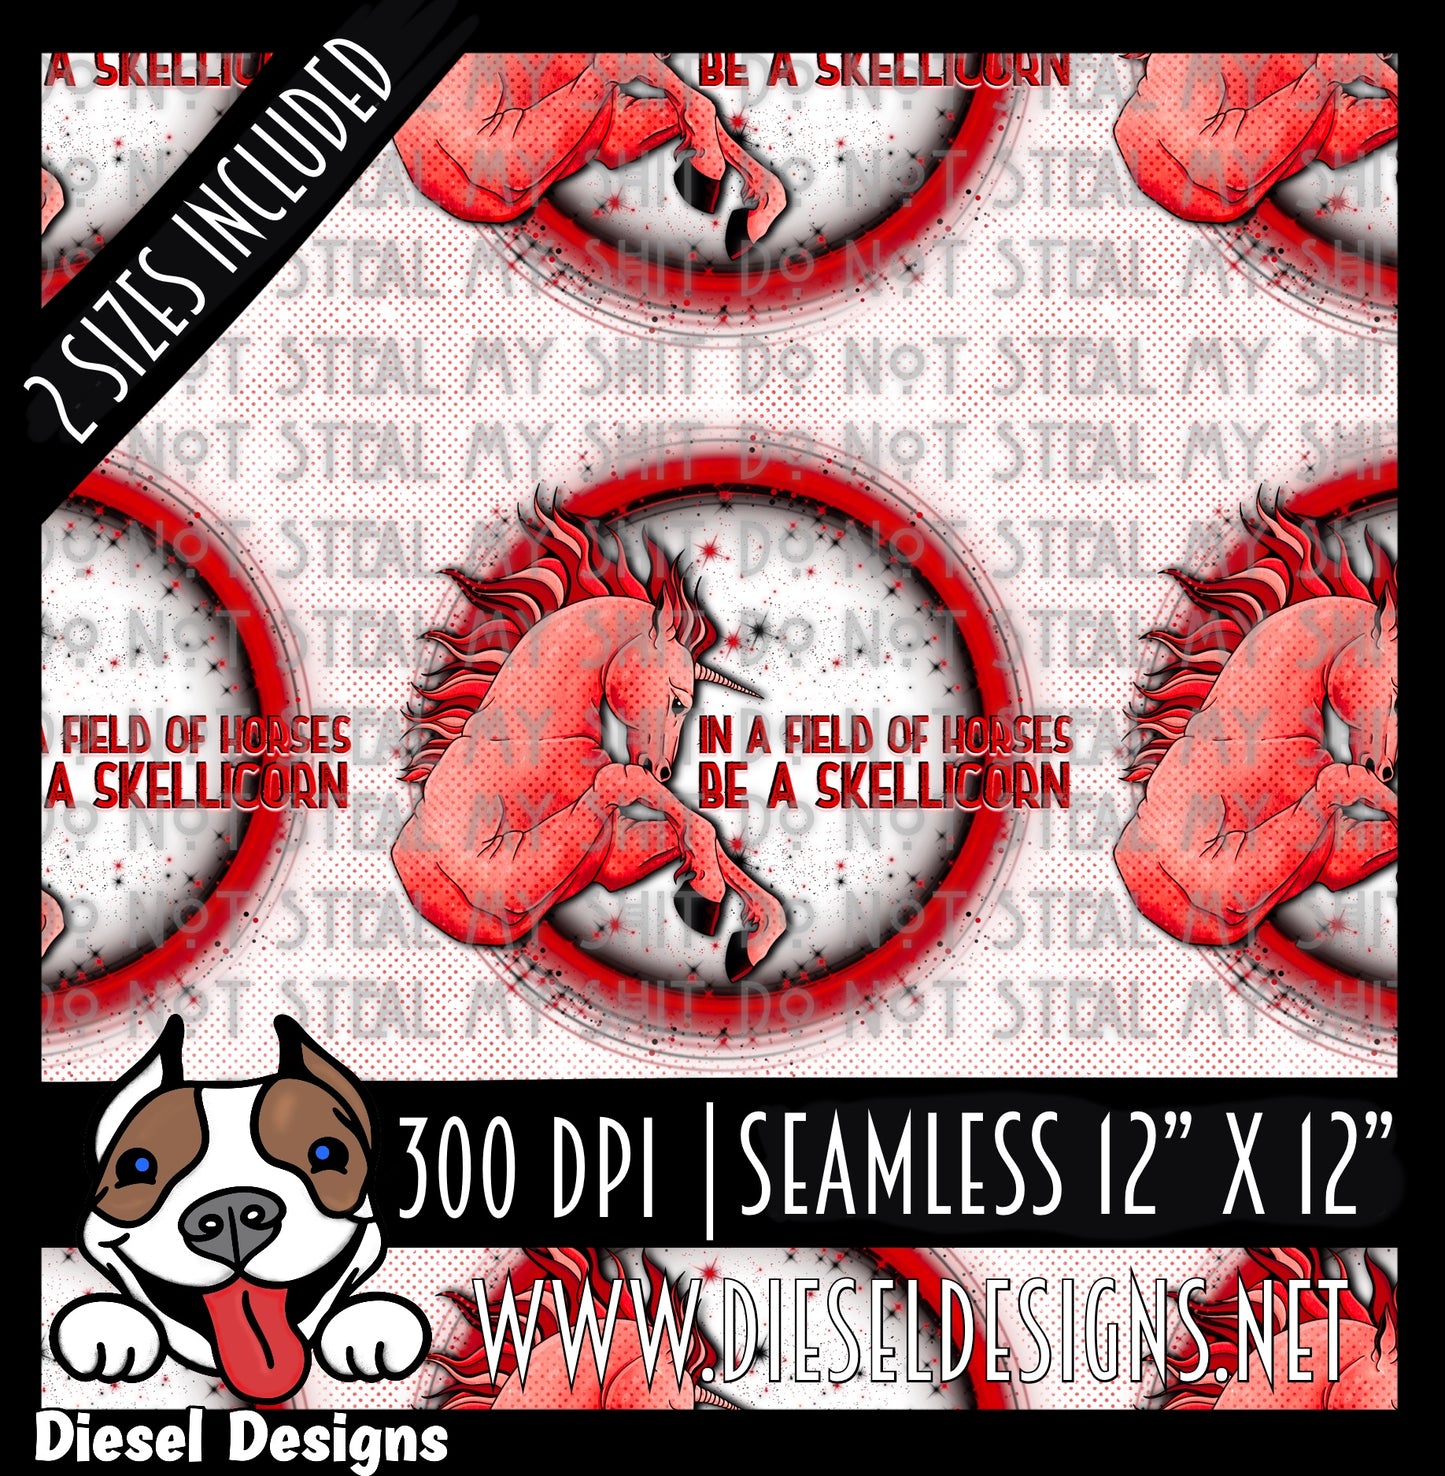 Skellicorn Seamless #2 | 300 DPI | Seamless 12"x12" | 2 sizes Included |